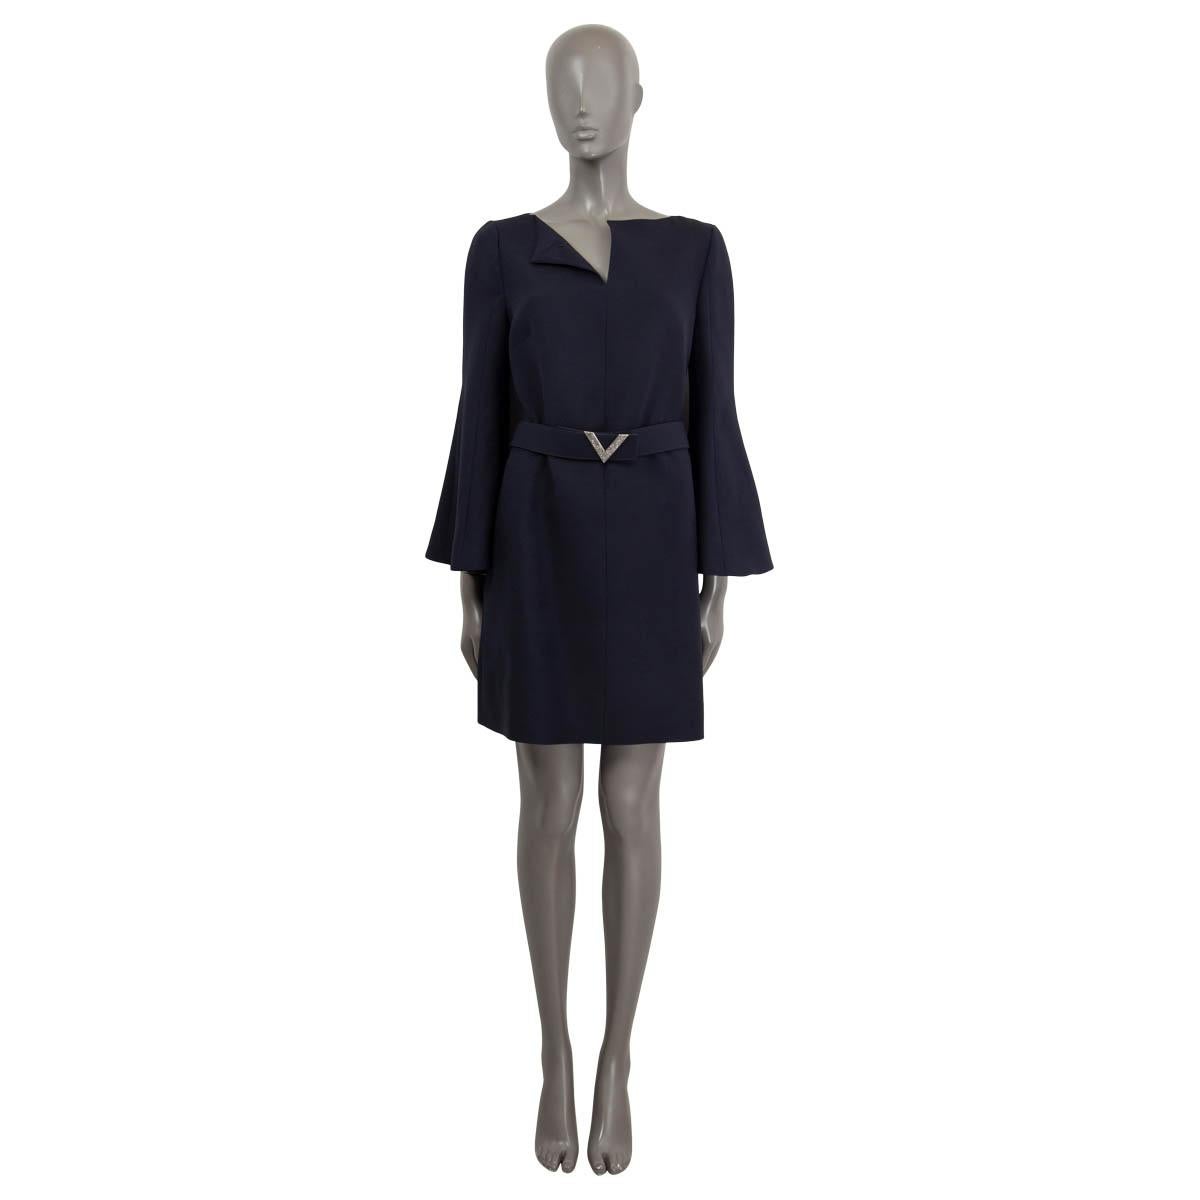 100% authentic Valentino logo belted a-line dress with bell sleeves in navy blue virgin wool (65%) and silk twill (35%). The design features a waist belt with the V logo embellished with grey rhinestones, two slit side pockets and opens with a